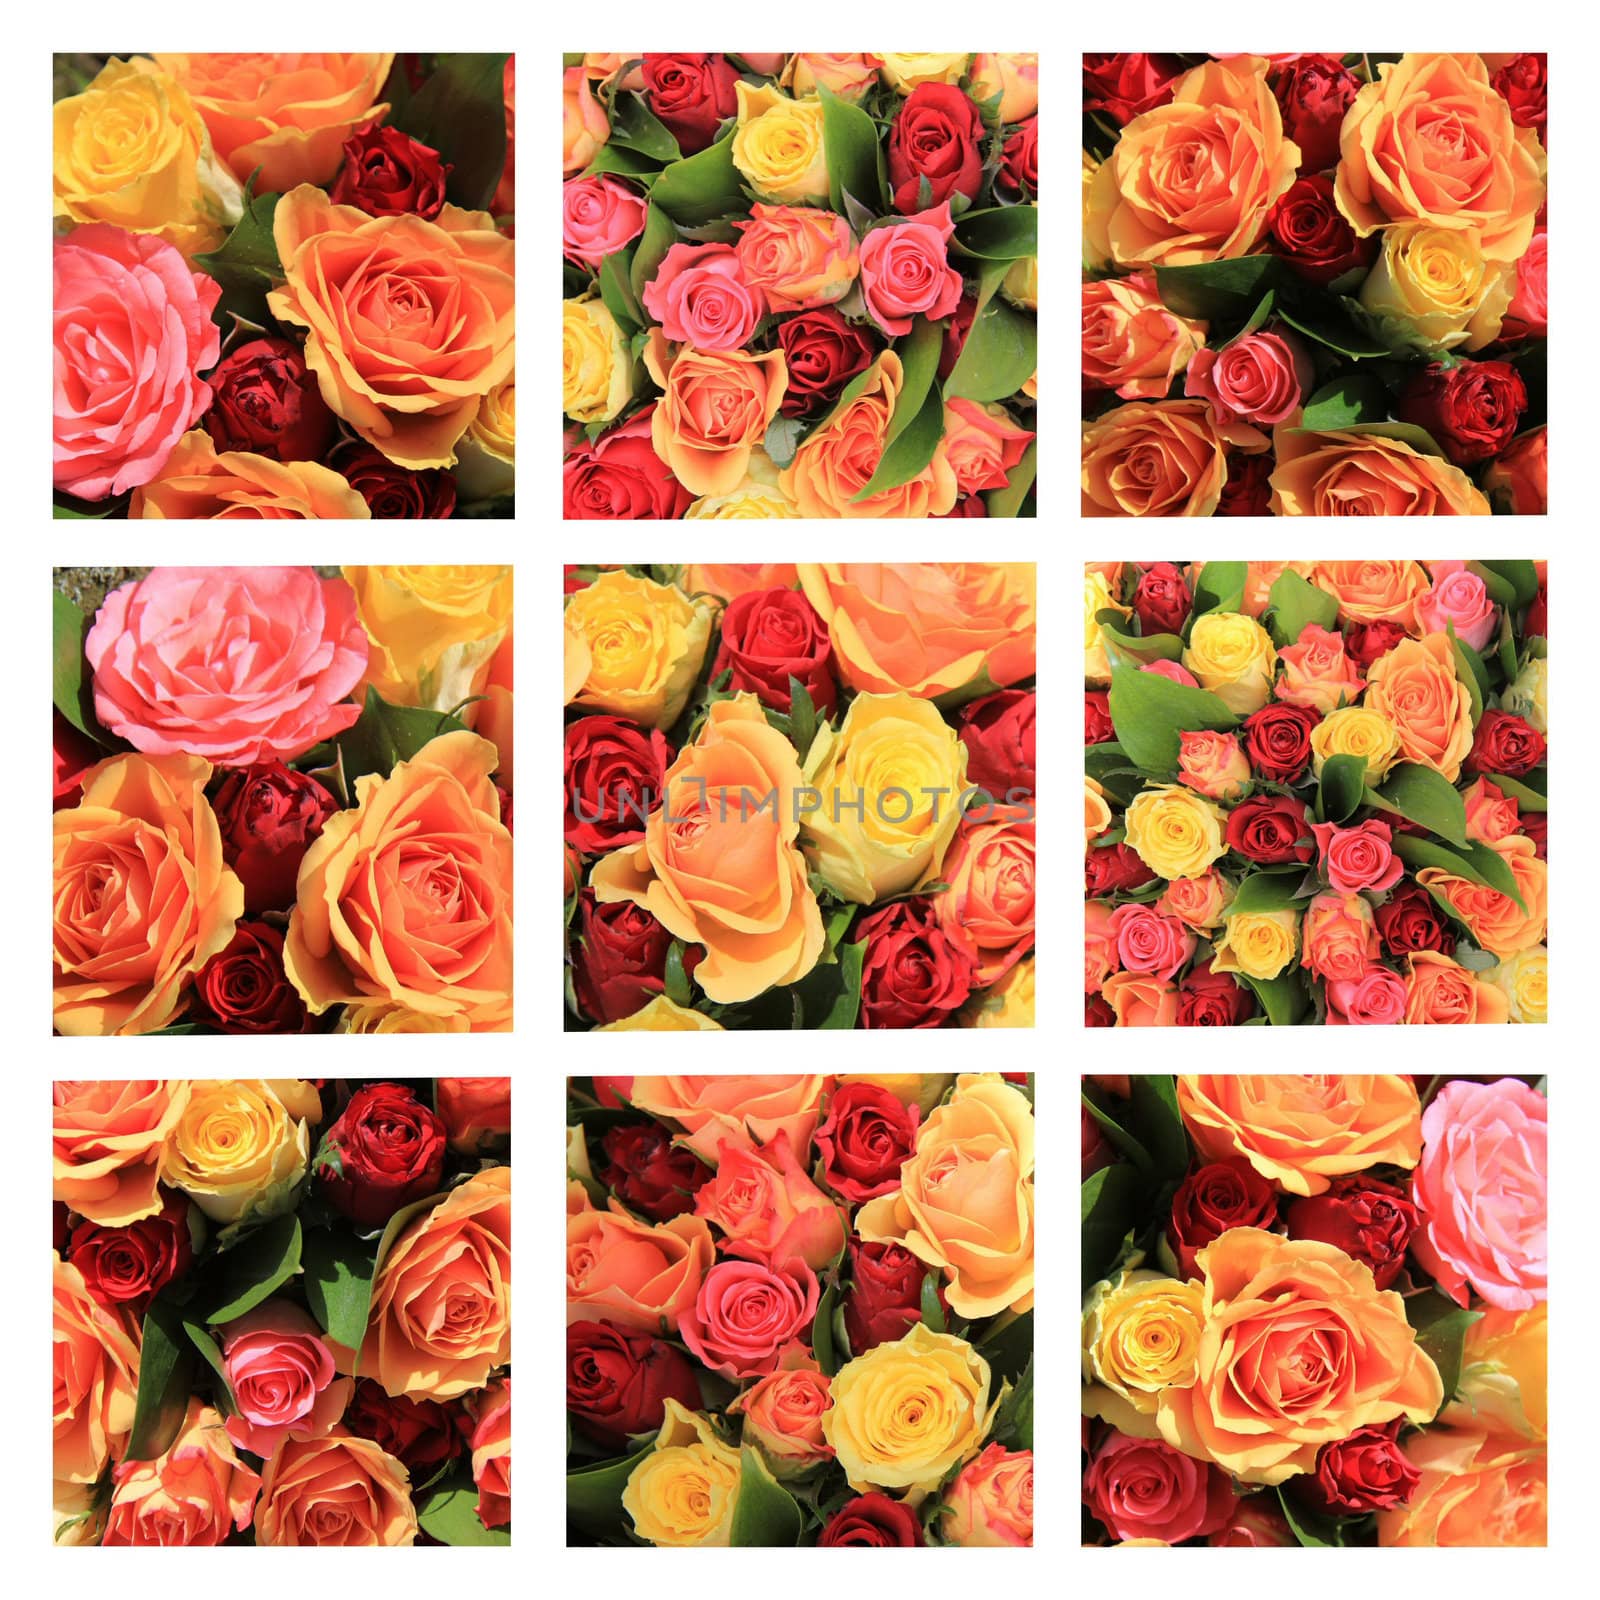 xL-collage made from 9 different high resolution rose images in yellow, pink, orange and red